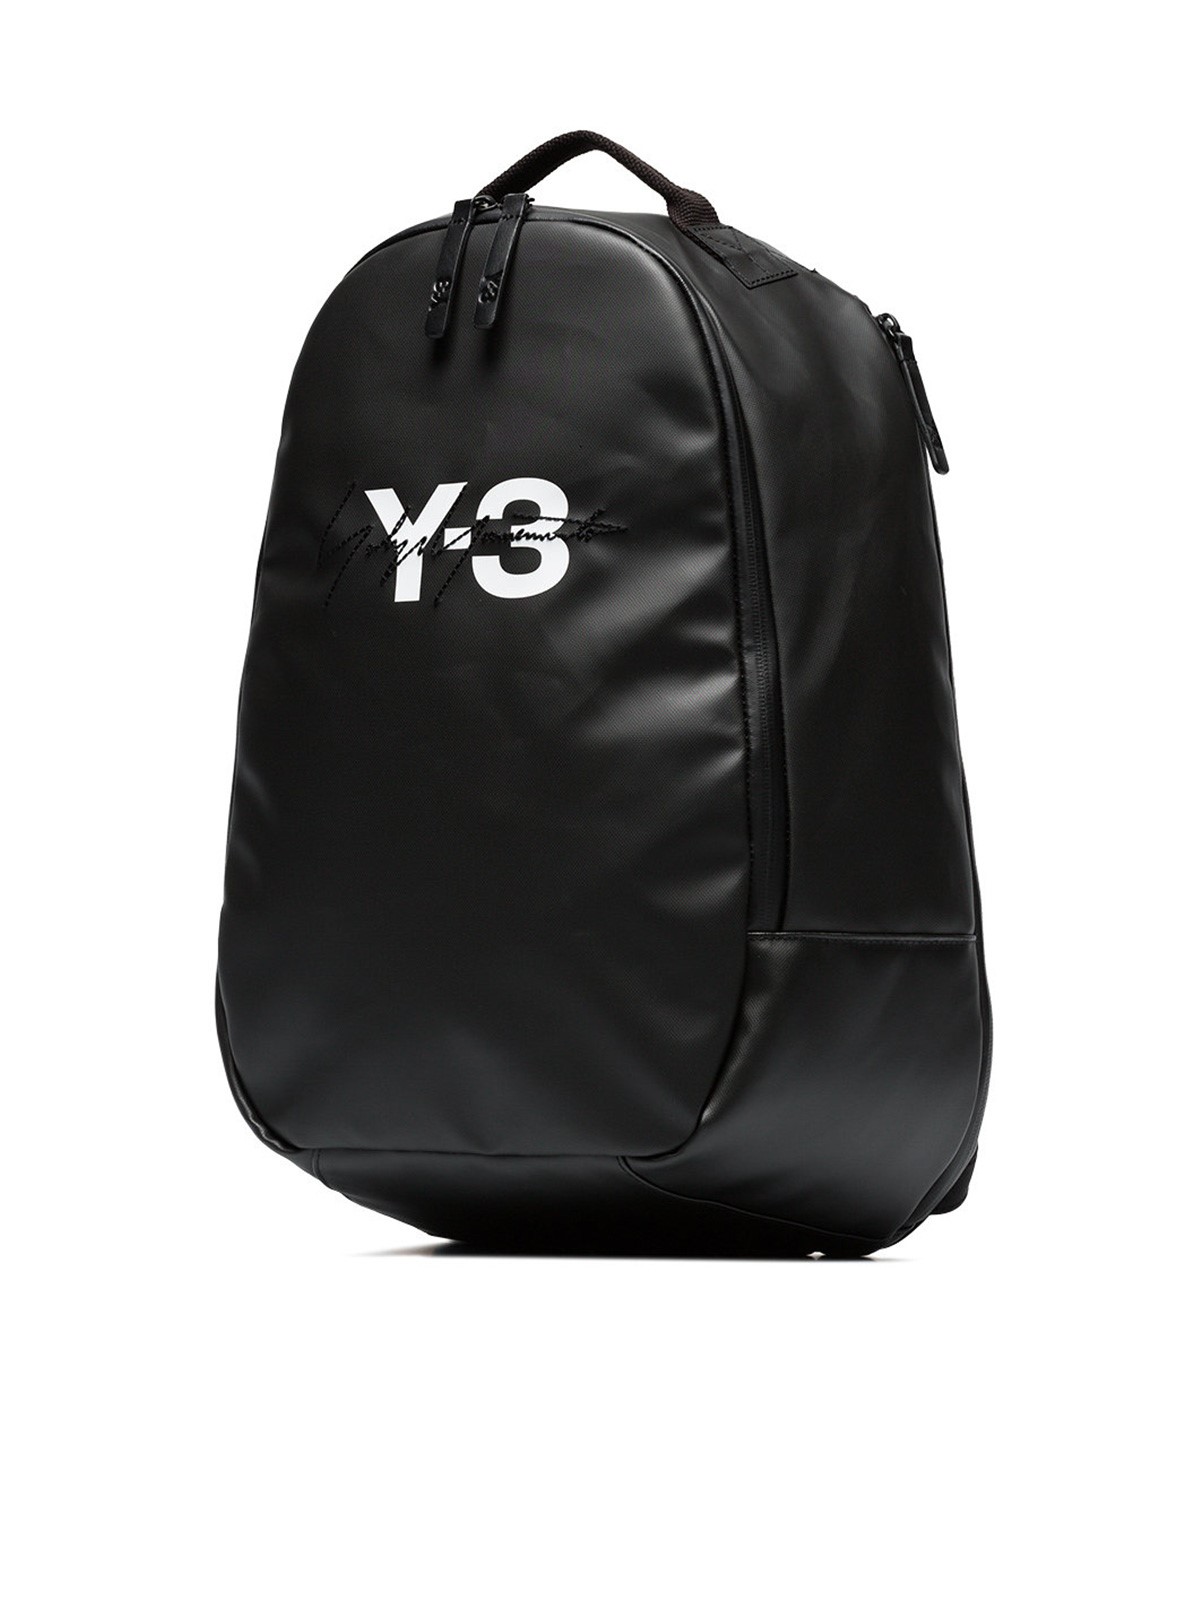 y-3 LOGO BACKPACK available on montiboutique.com - 23267